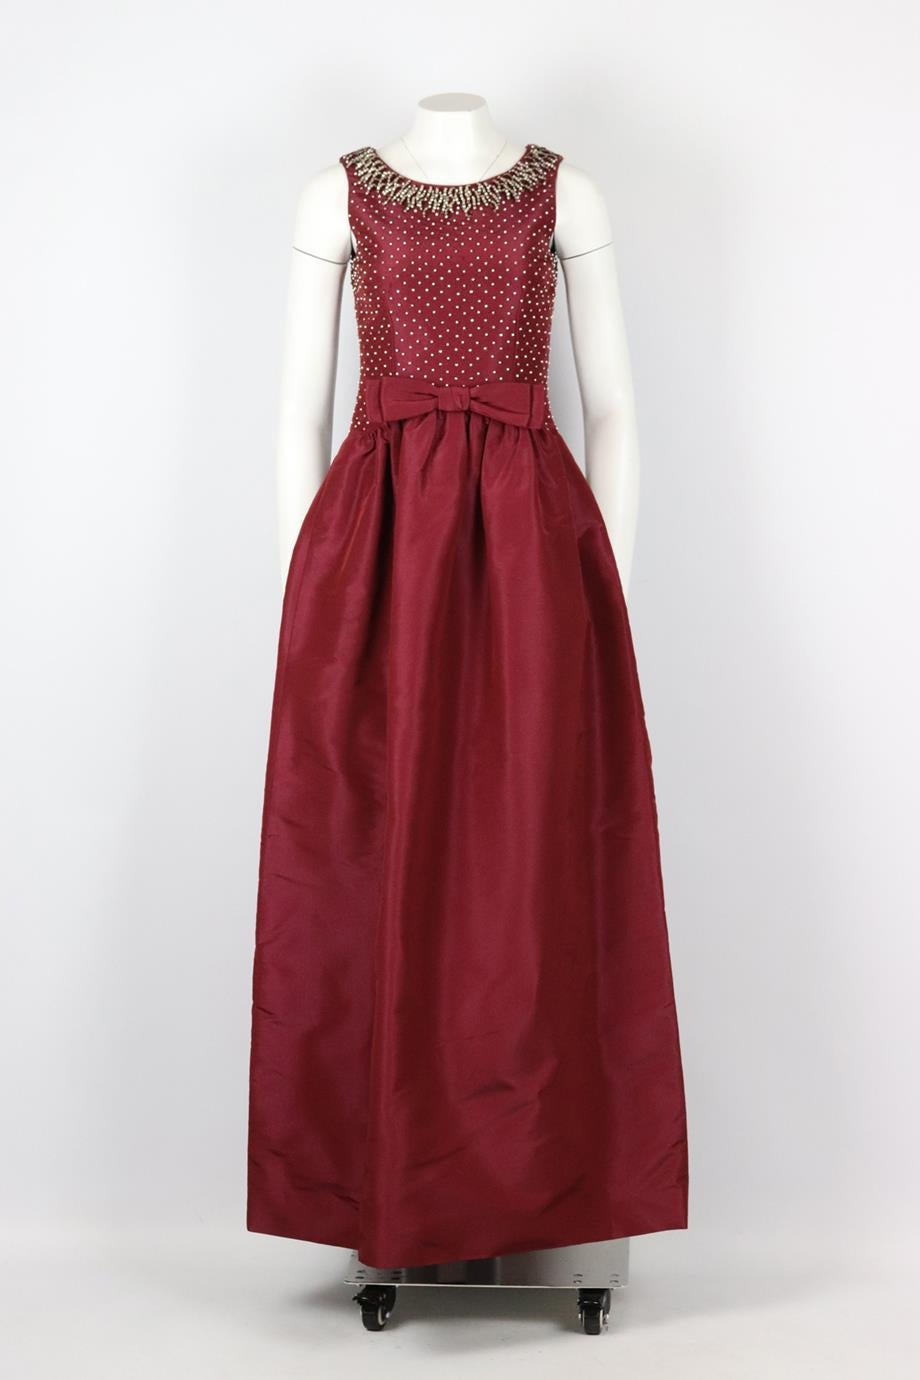 Dolce & Gabbana crystal embellished silk faille gown. Burgundy. Sleeveless, crewneck. Zip fastening at back. 70% silk, 20% glass, 10% polyester; lining: 100% silk. Size: IT 40 (UK 8, US 4, FR 36). Bust: 32.5 in. Waist: 29.8 in. Hips: 38.2 in.